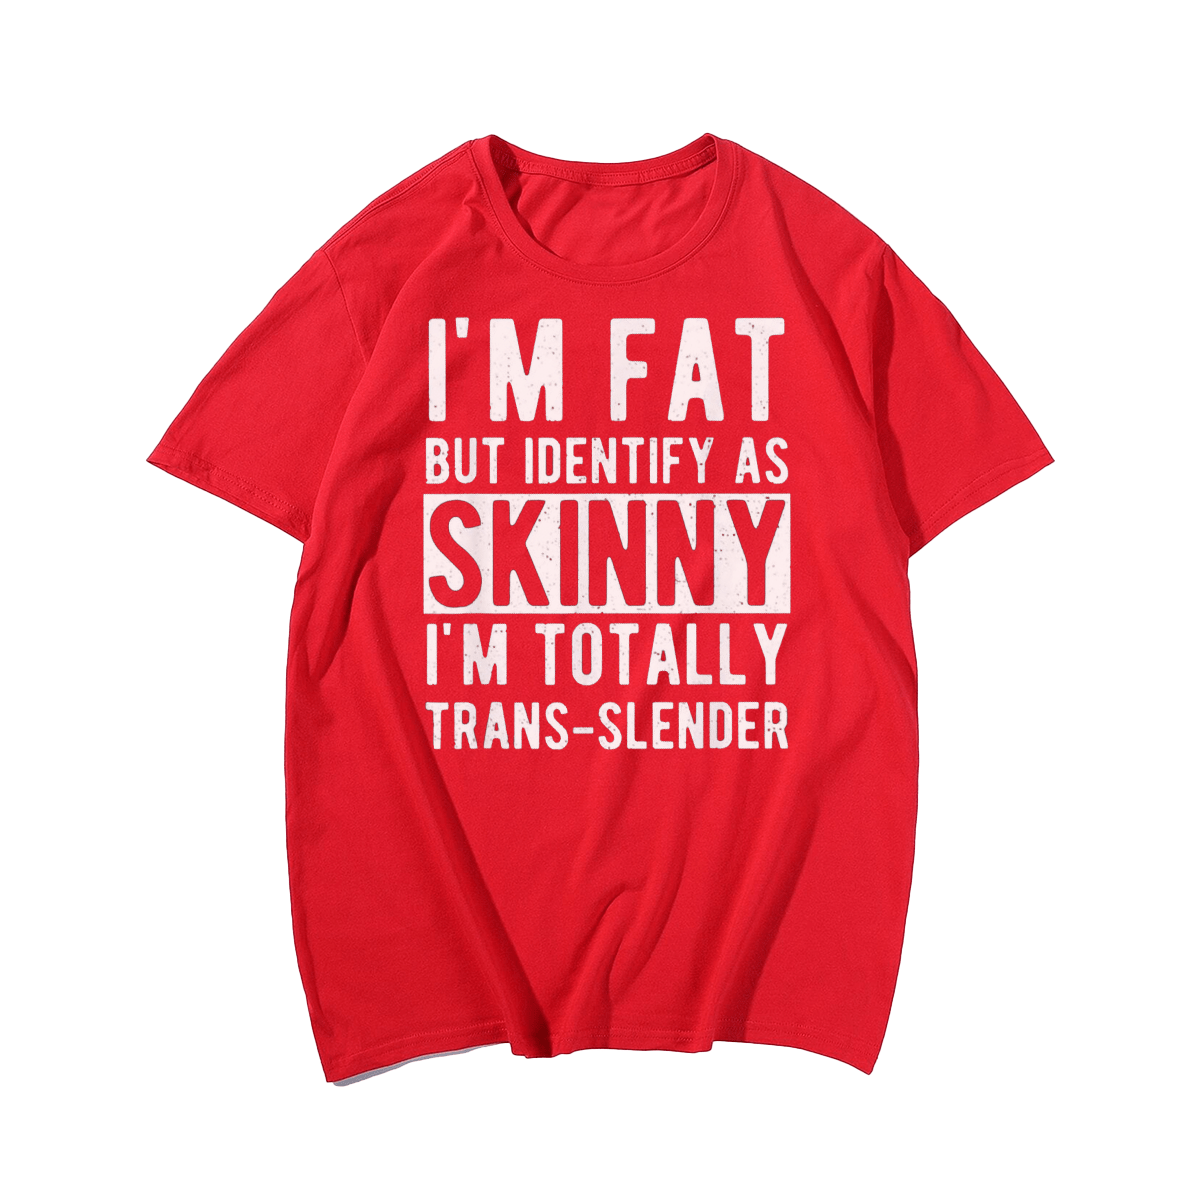 I'm Fat But identify as skinny i'm totally trans-slender Men T-Shirt Oversize Plus Size Man Clothing - Big Tall Men Must Have